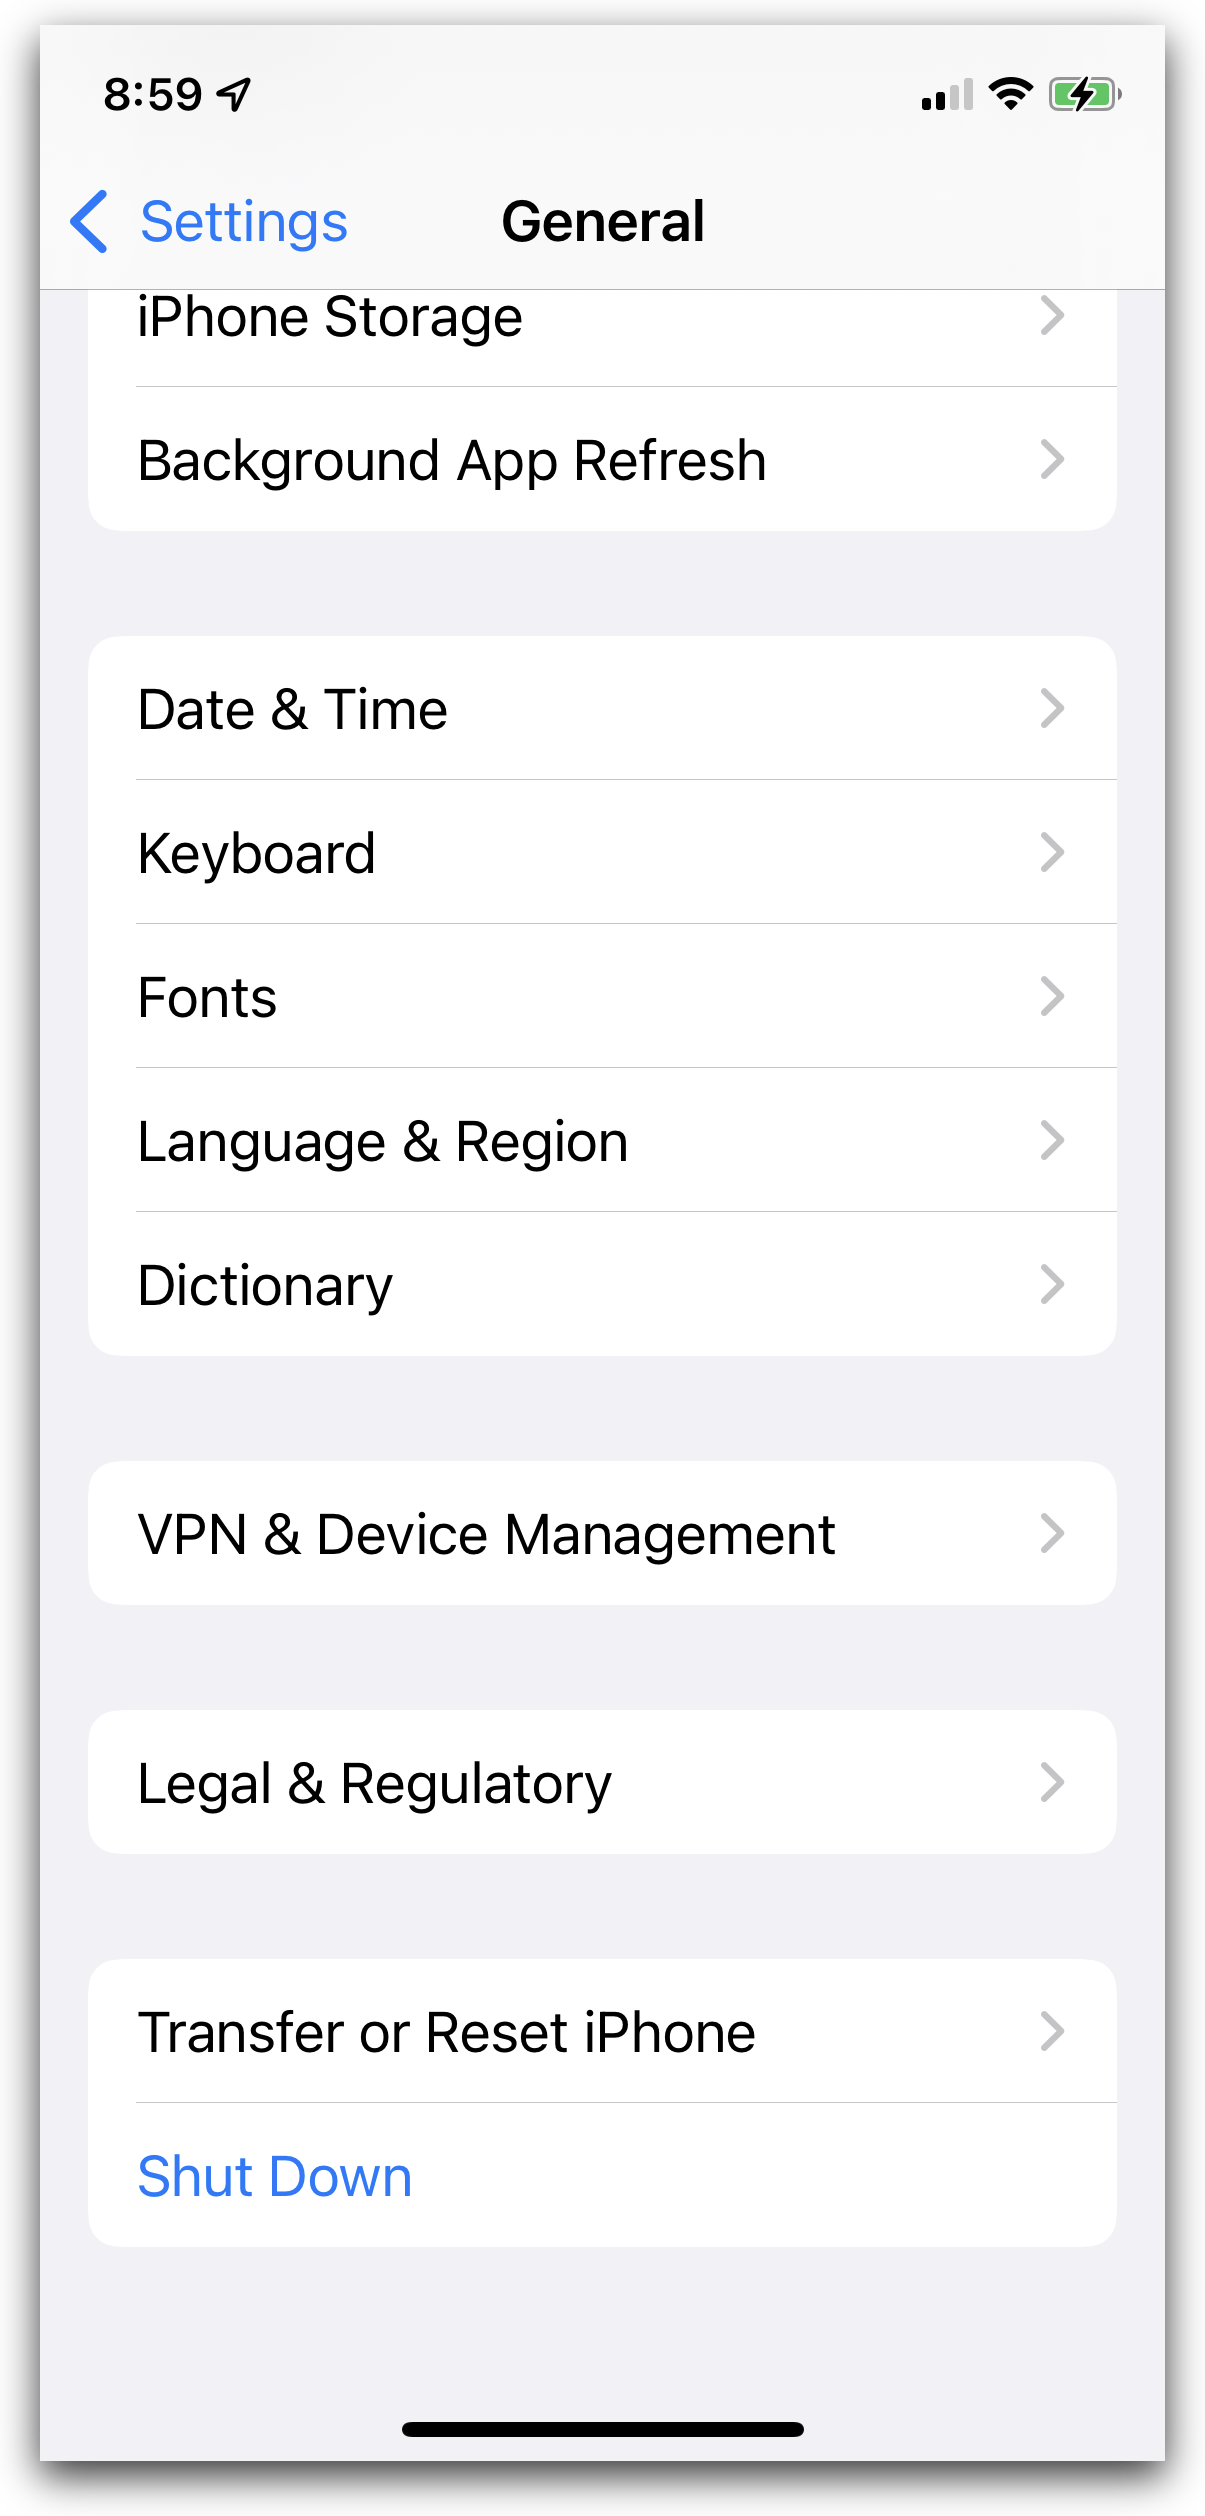 Settings app has no Profiles section any more